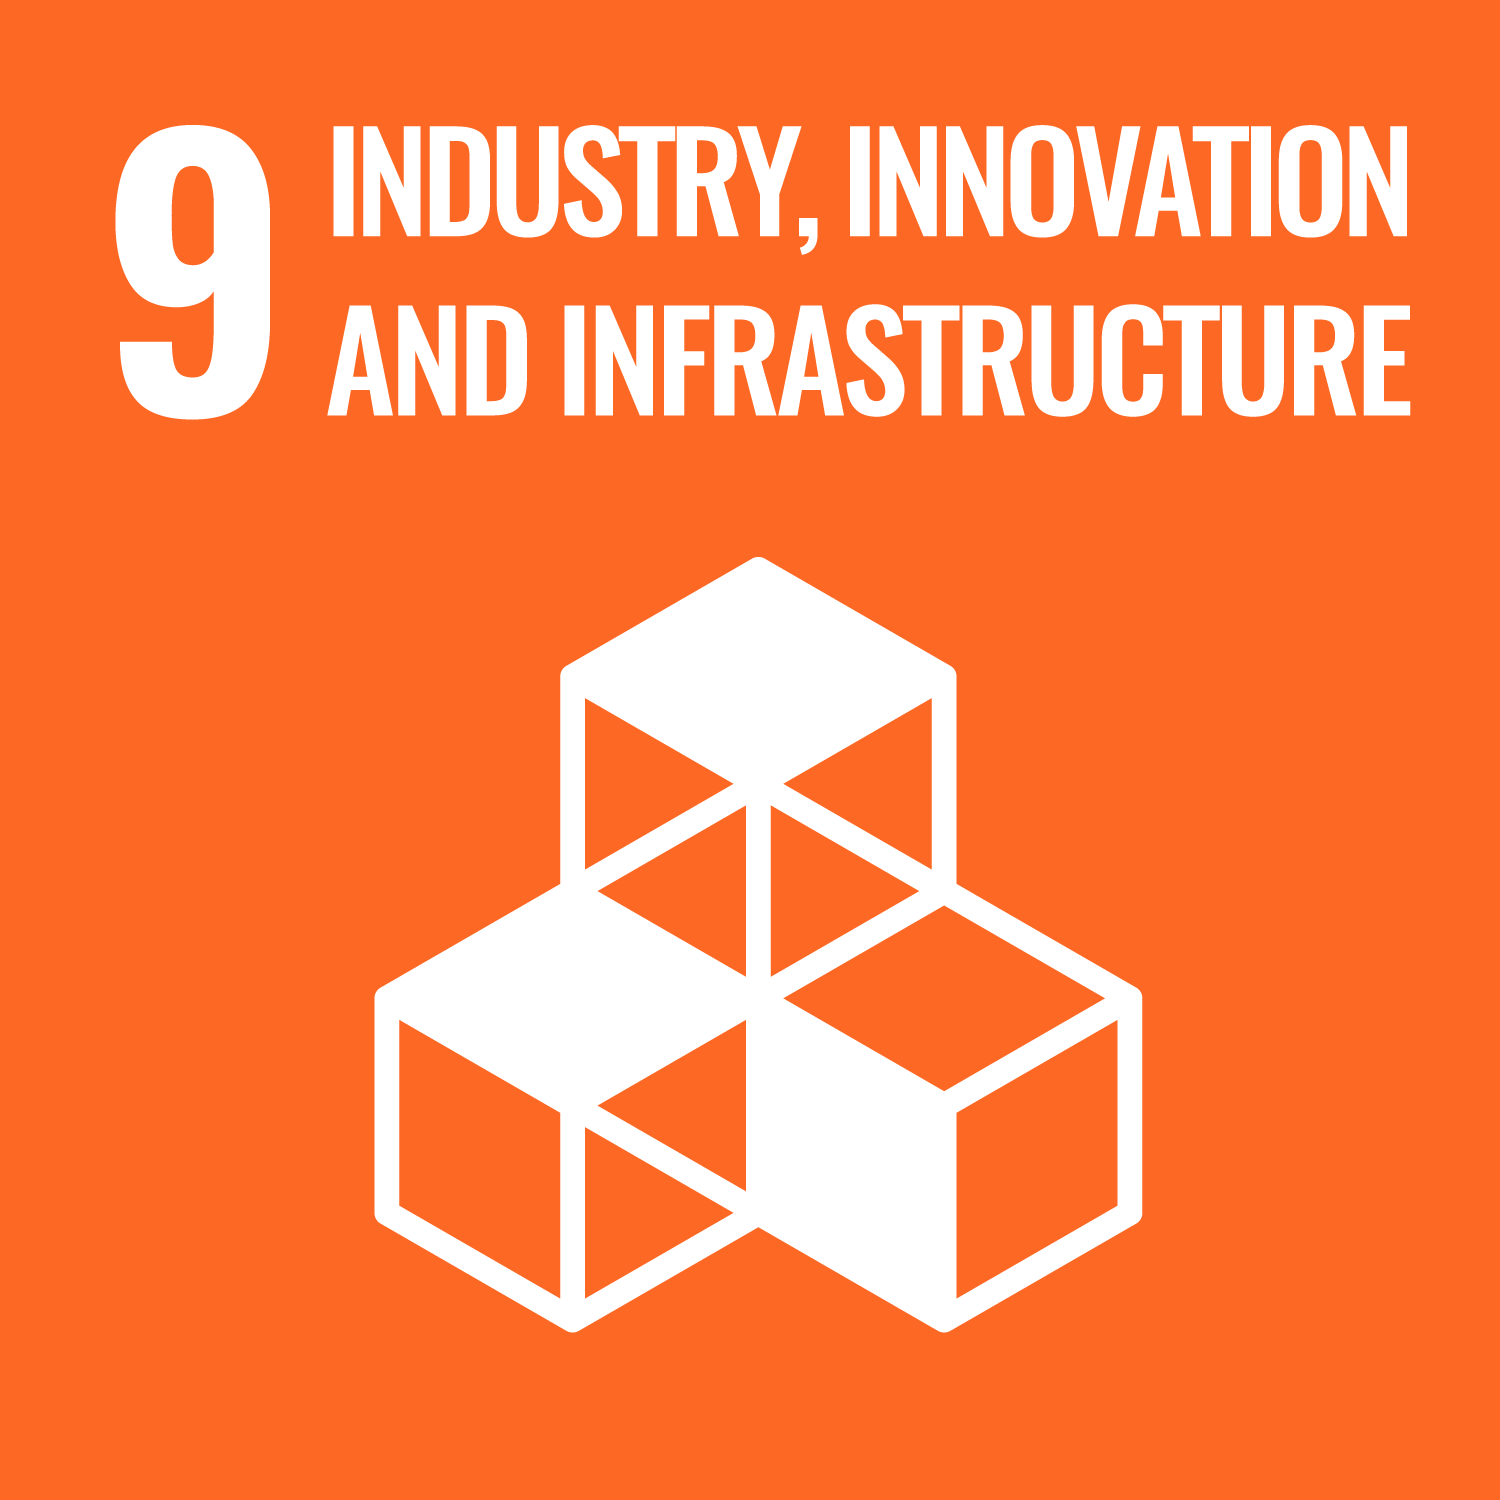 GOAL 9: Industry, Innovation and Infrastructure